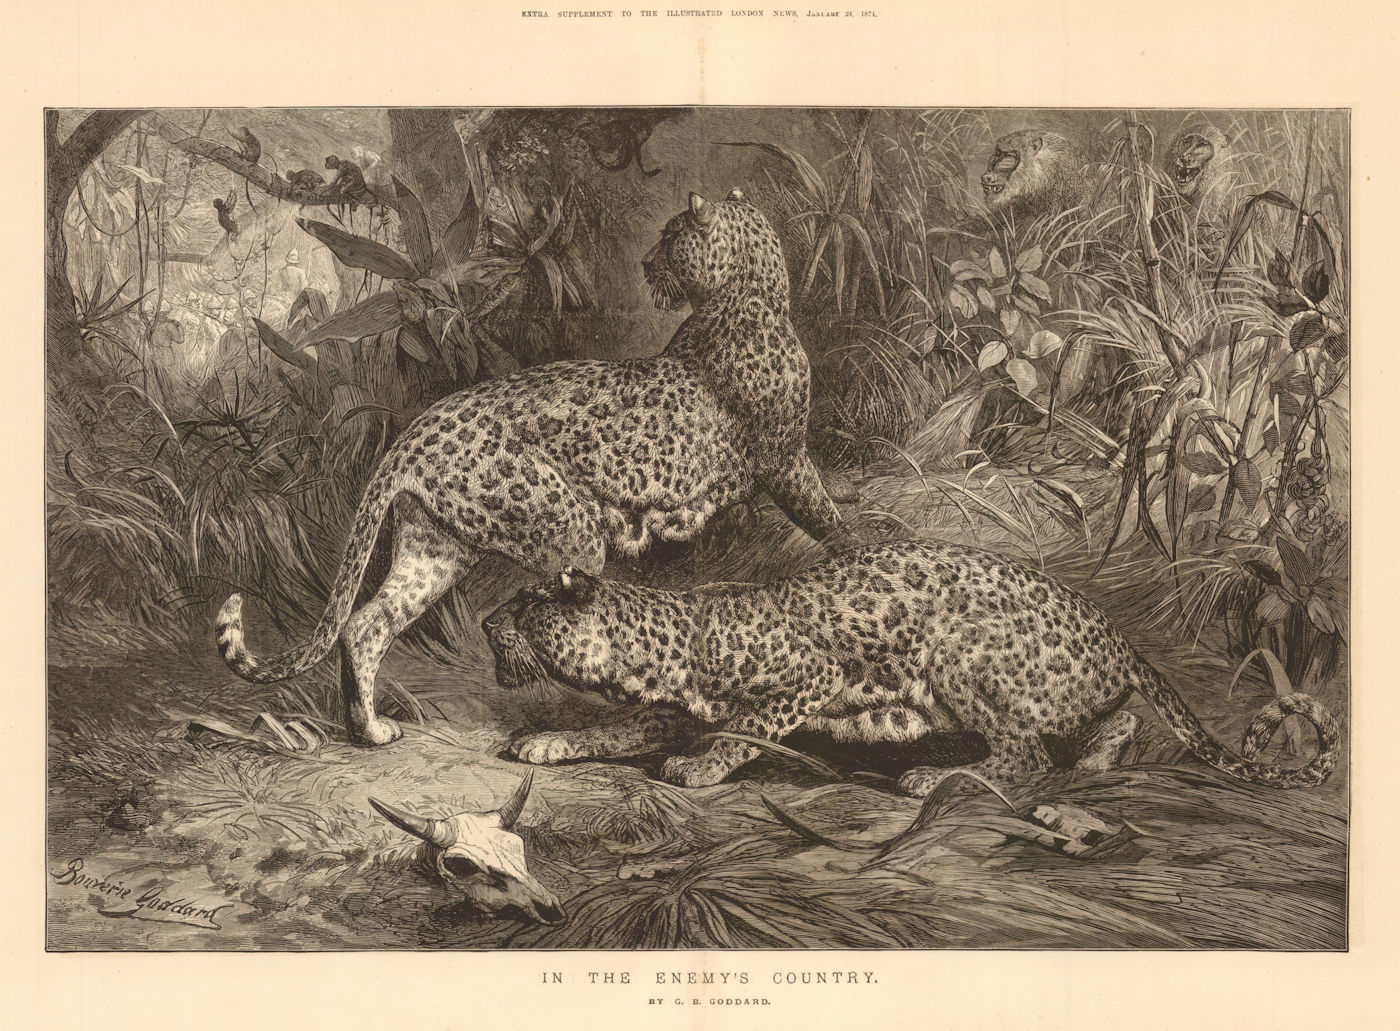 In the Enemy's Country, by GB Goddard. Leopards hunting monkeys 1874 ILN print